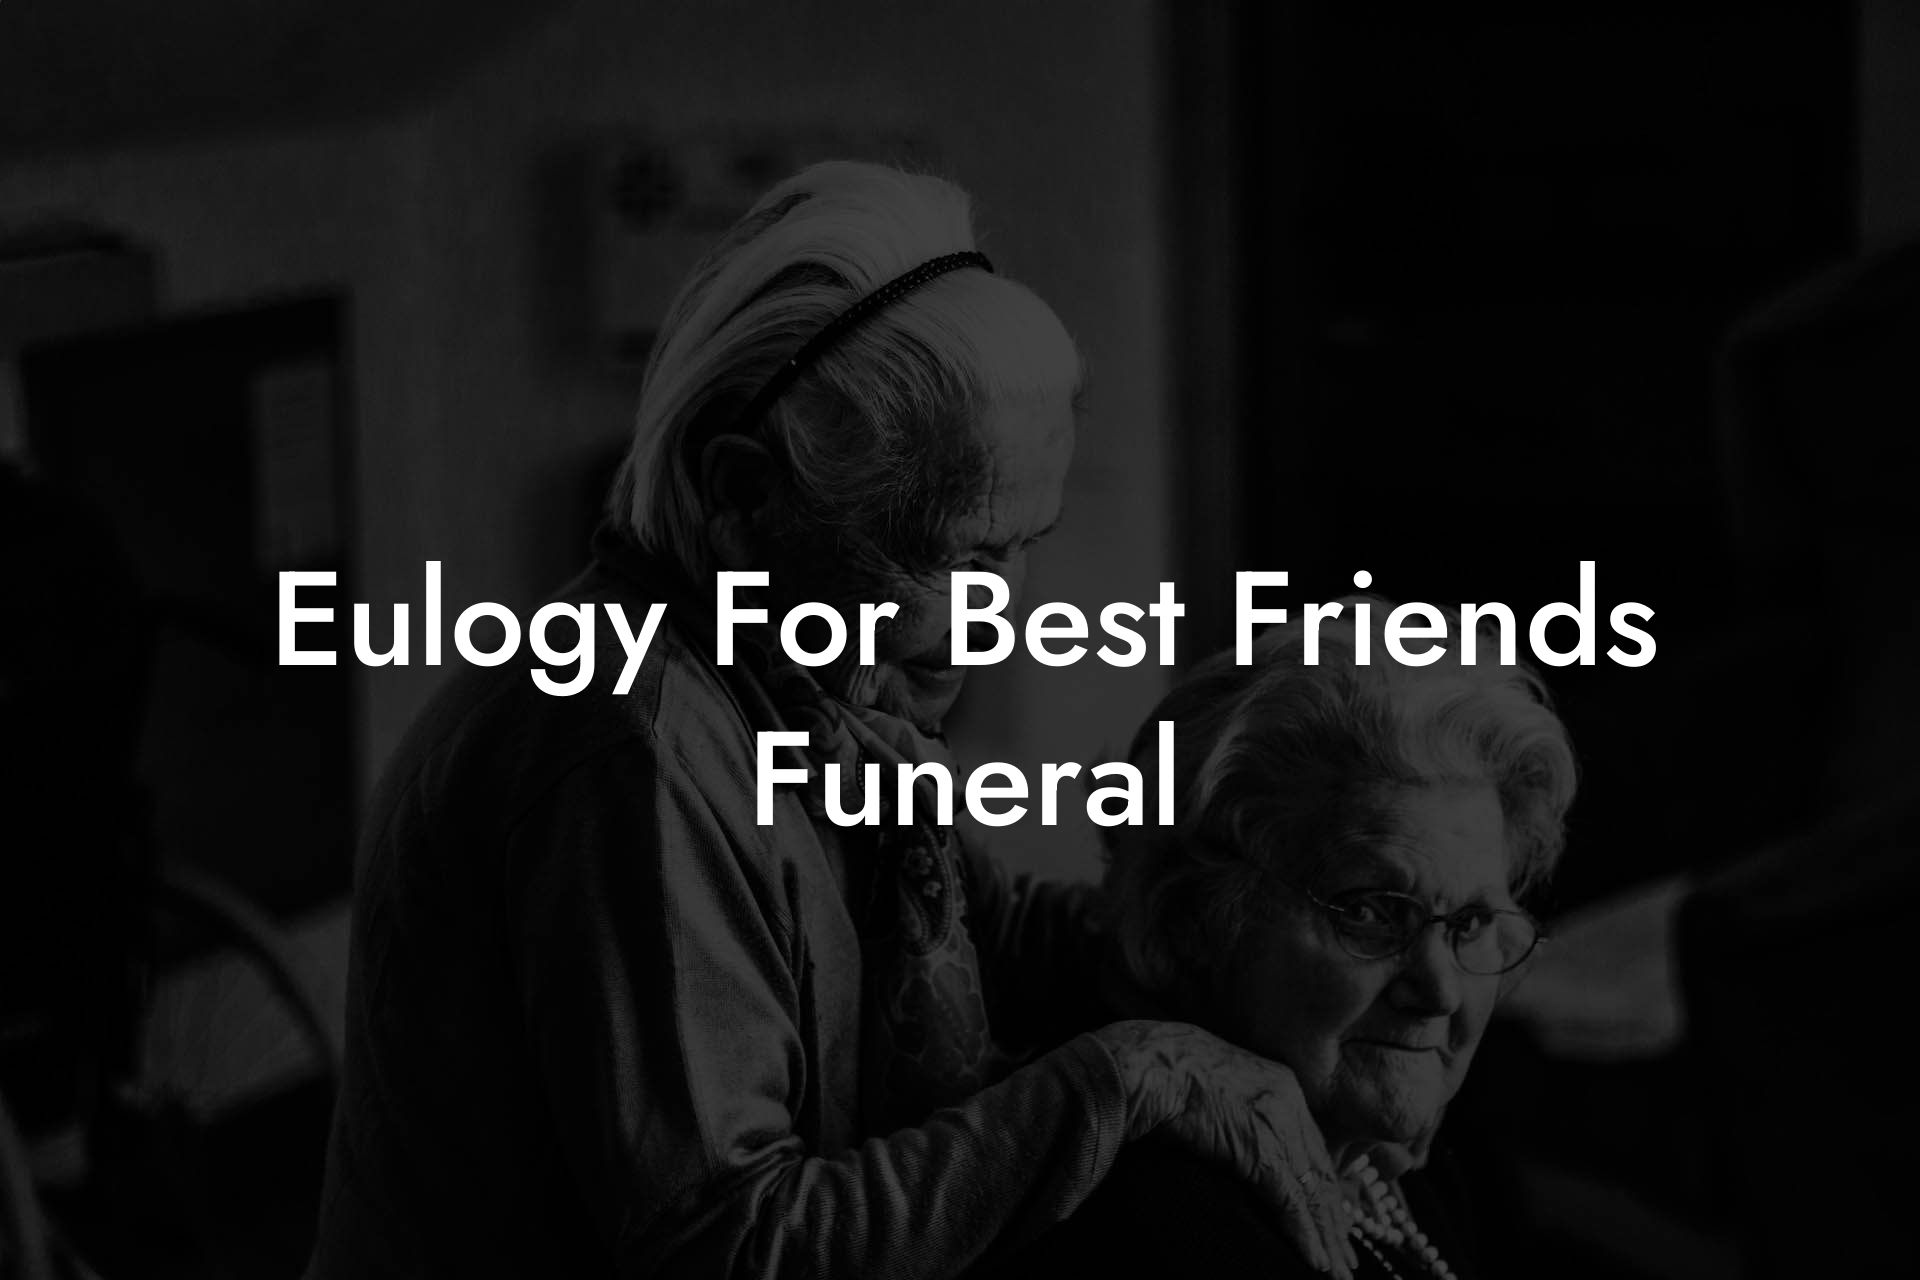 Eulogy For Best Friends Funeral